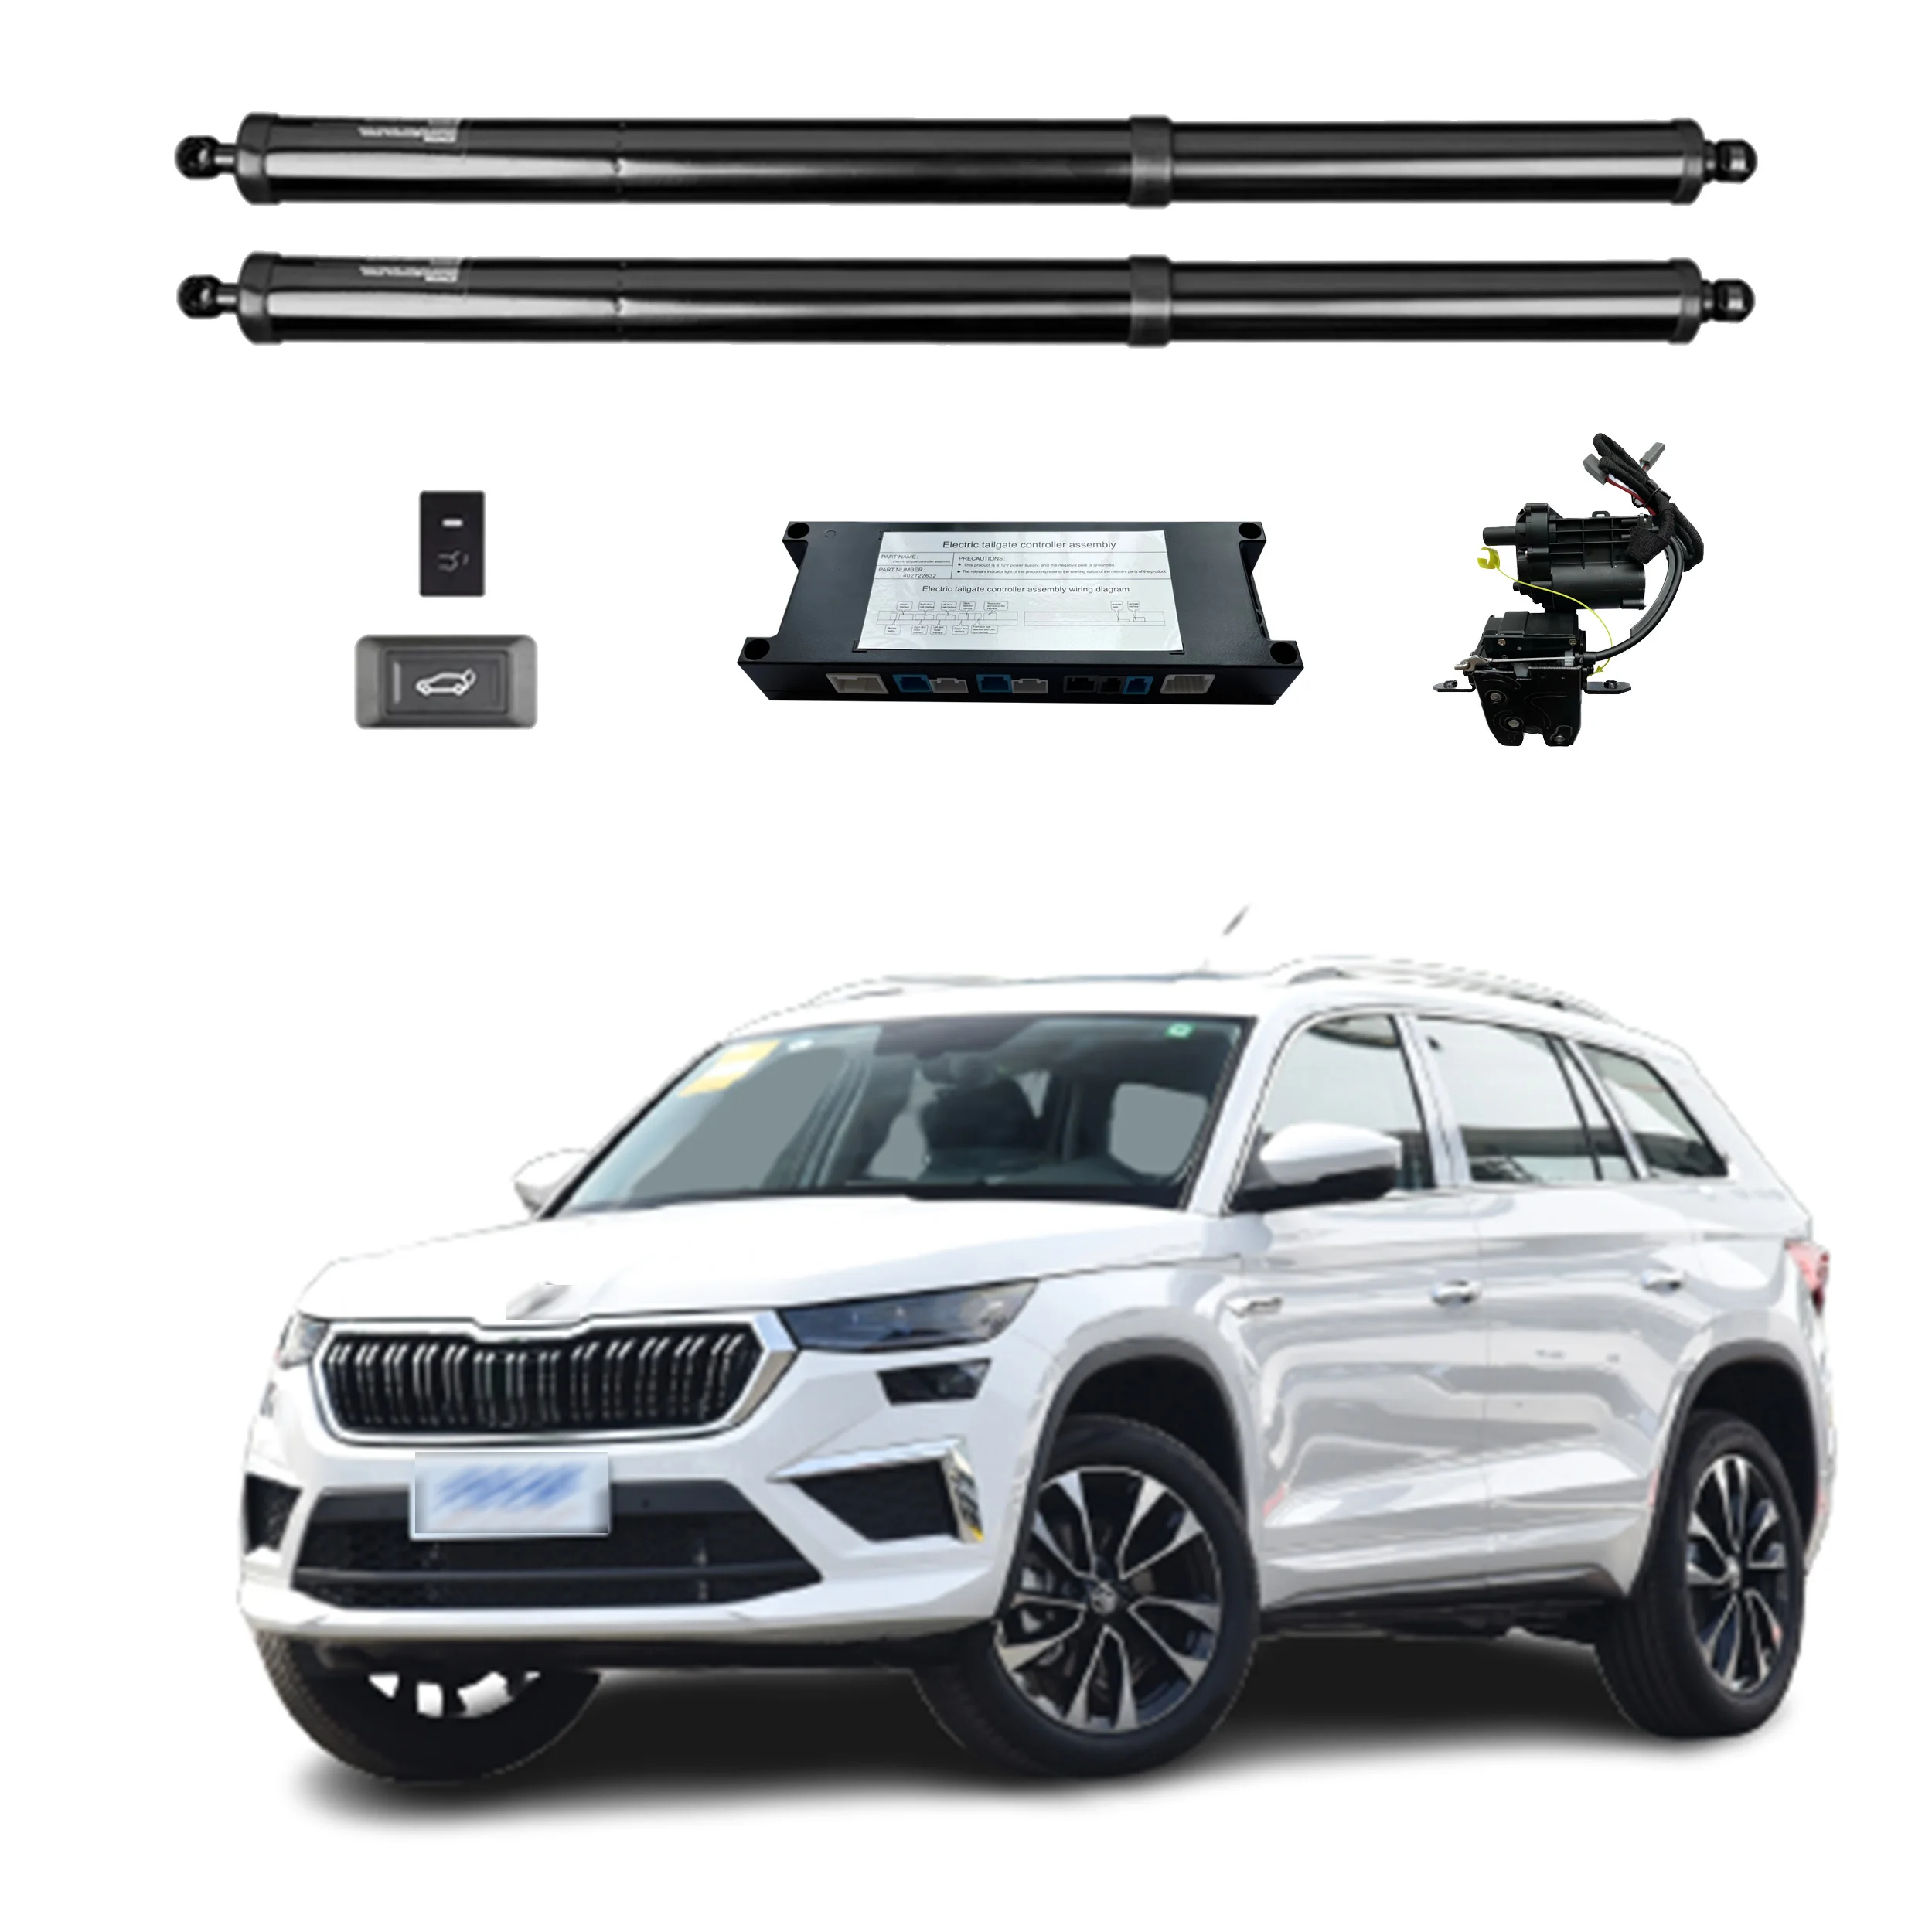 

For Skoda Kodiaq 2016+ Smart Power Tailgate Rear Door Auto Trunk With Remote Control Hands-Free Foot-Activated Optional